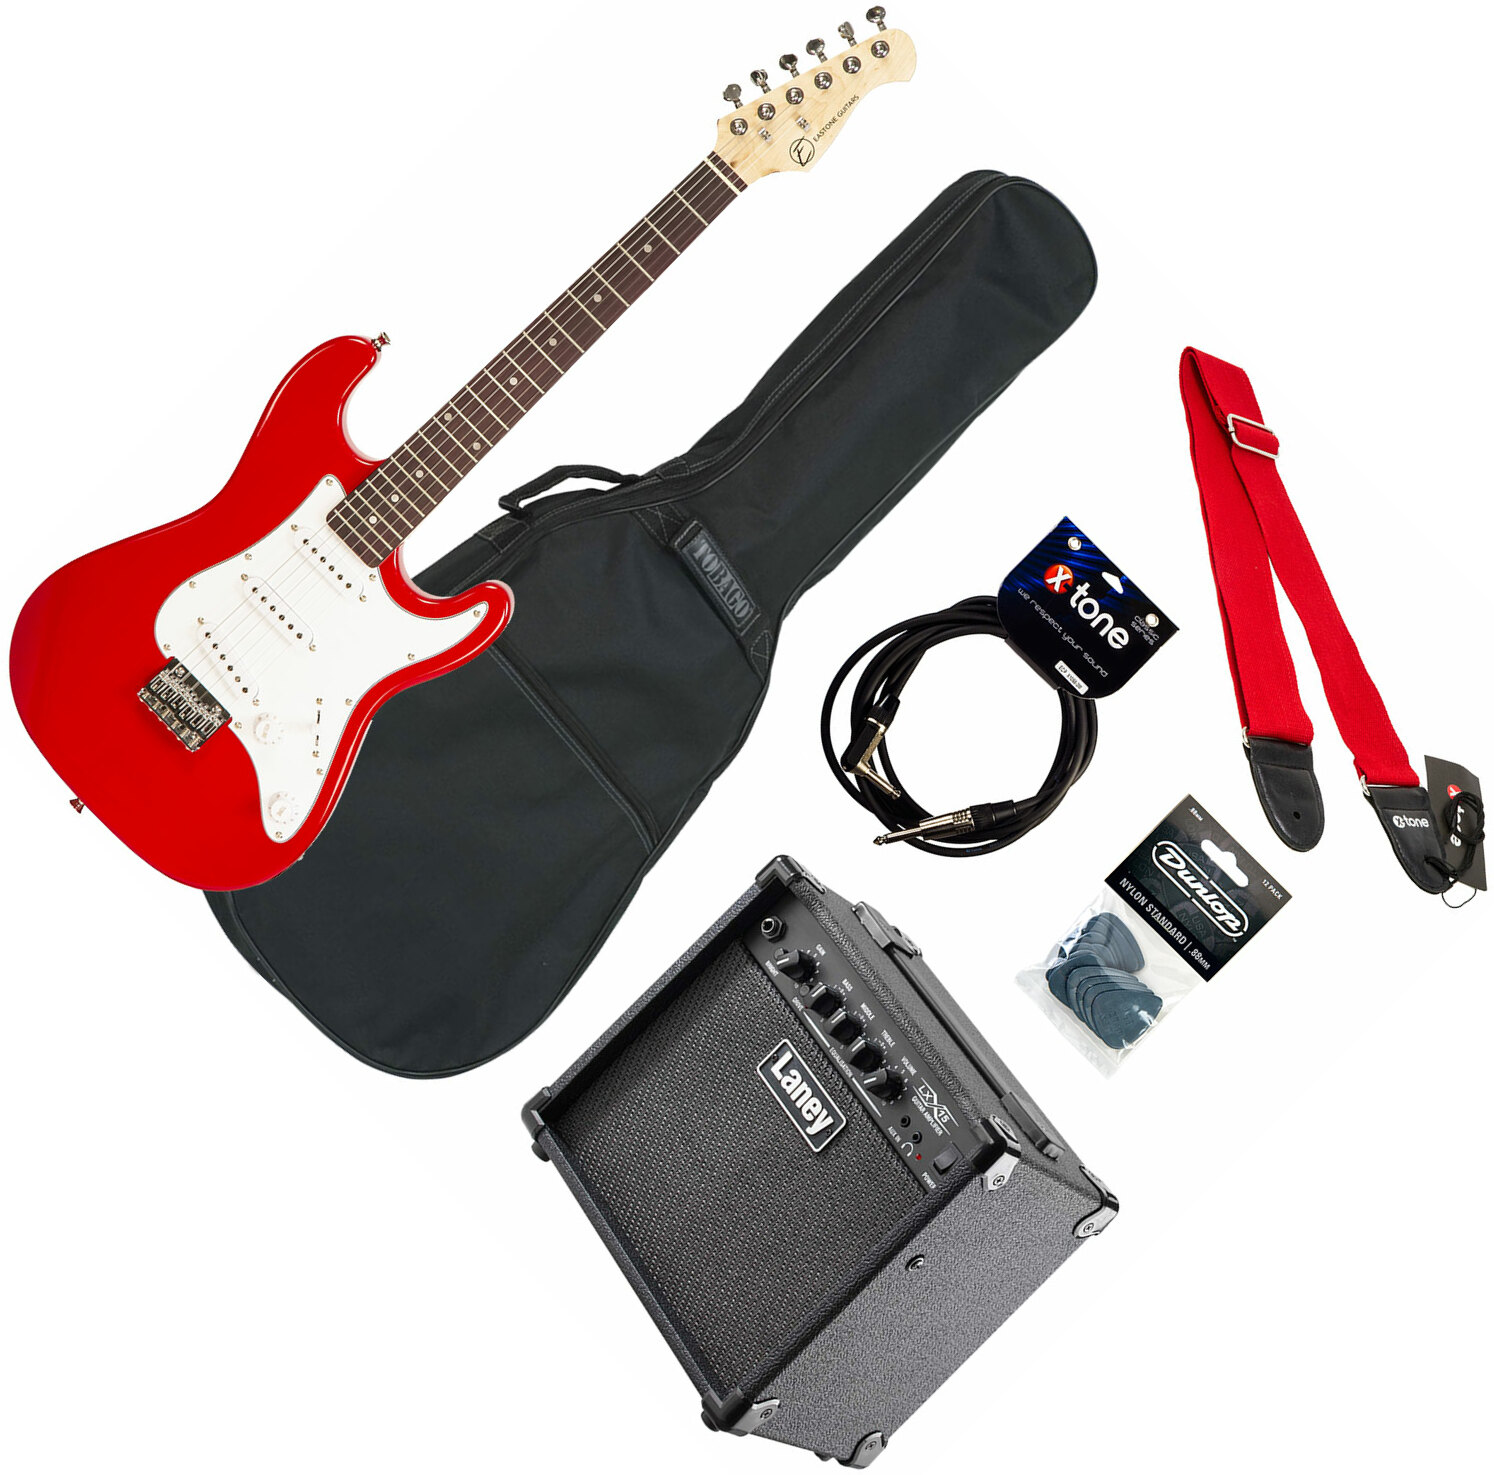 Eastone Str Mini +marshall Mg10 +cable +housse +courroie +mediators - Red - Guitarra eléctrica para niños - Main picture